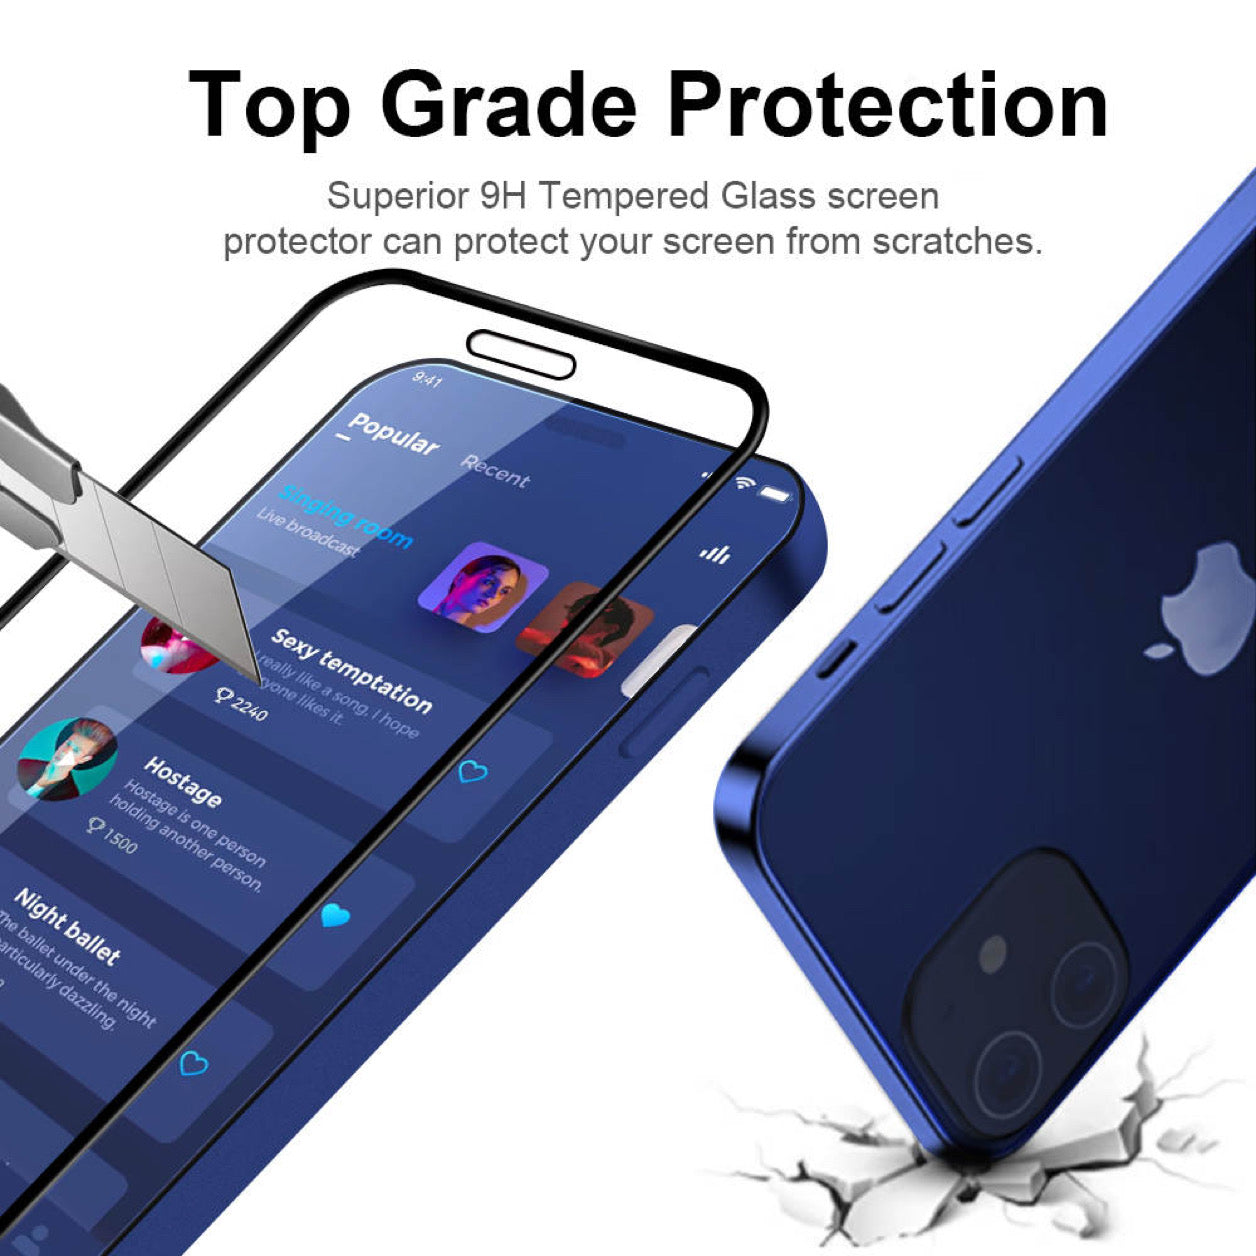 GLASS SCREEN PROTECTOR - thefonecasecompany